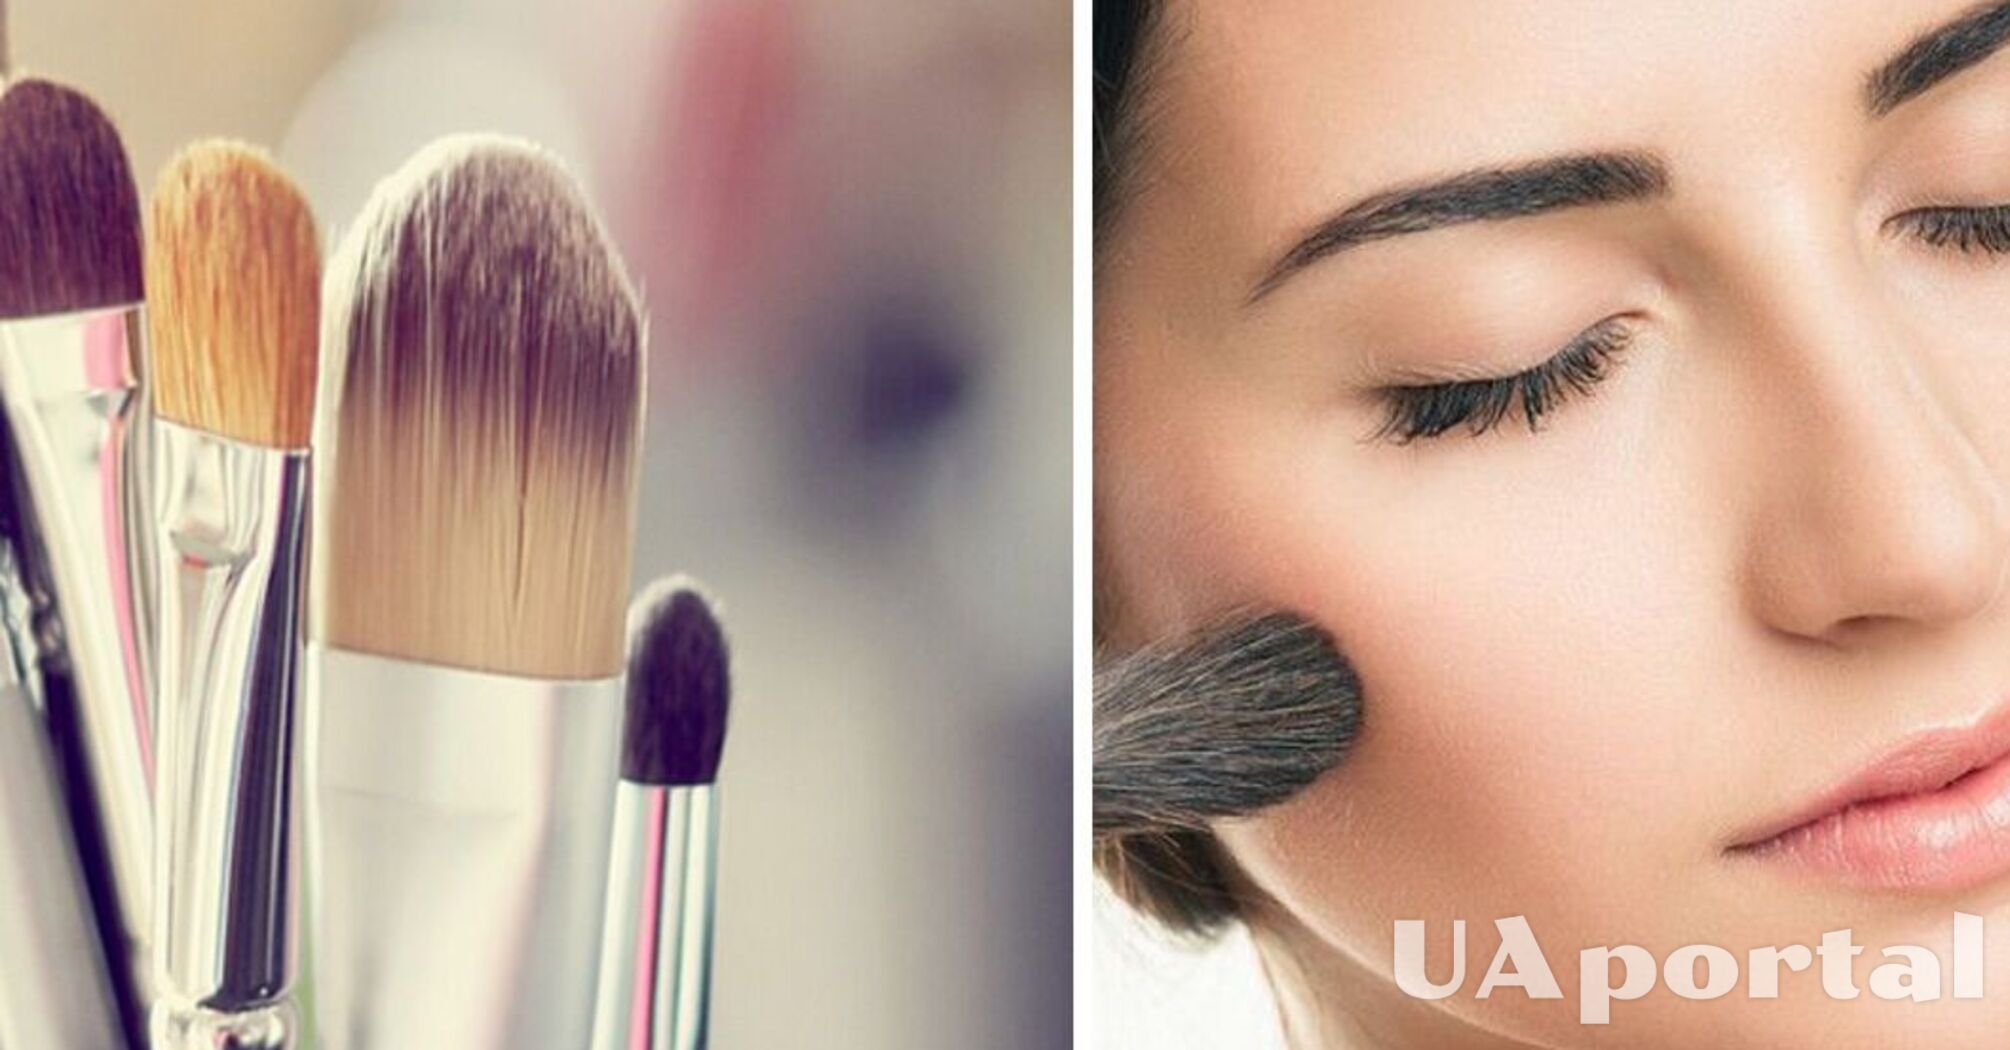 What diseases can makeup brushes contain and why they need to be cleaned regularly